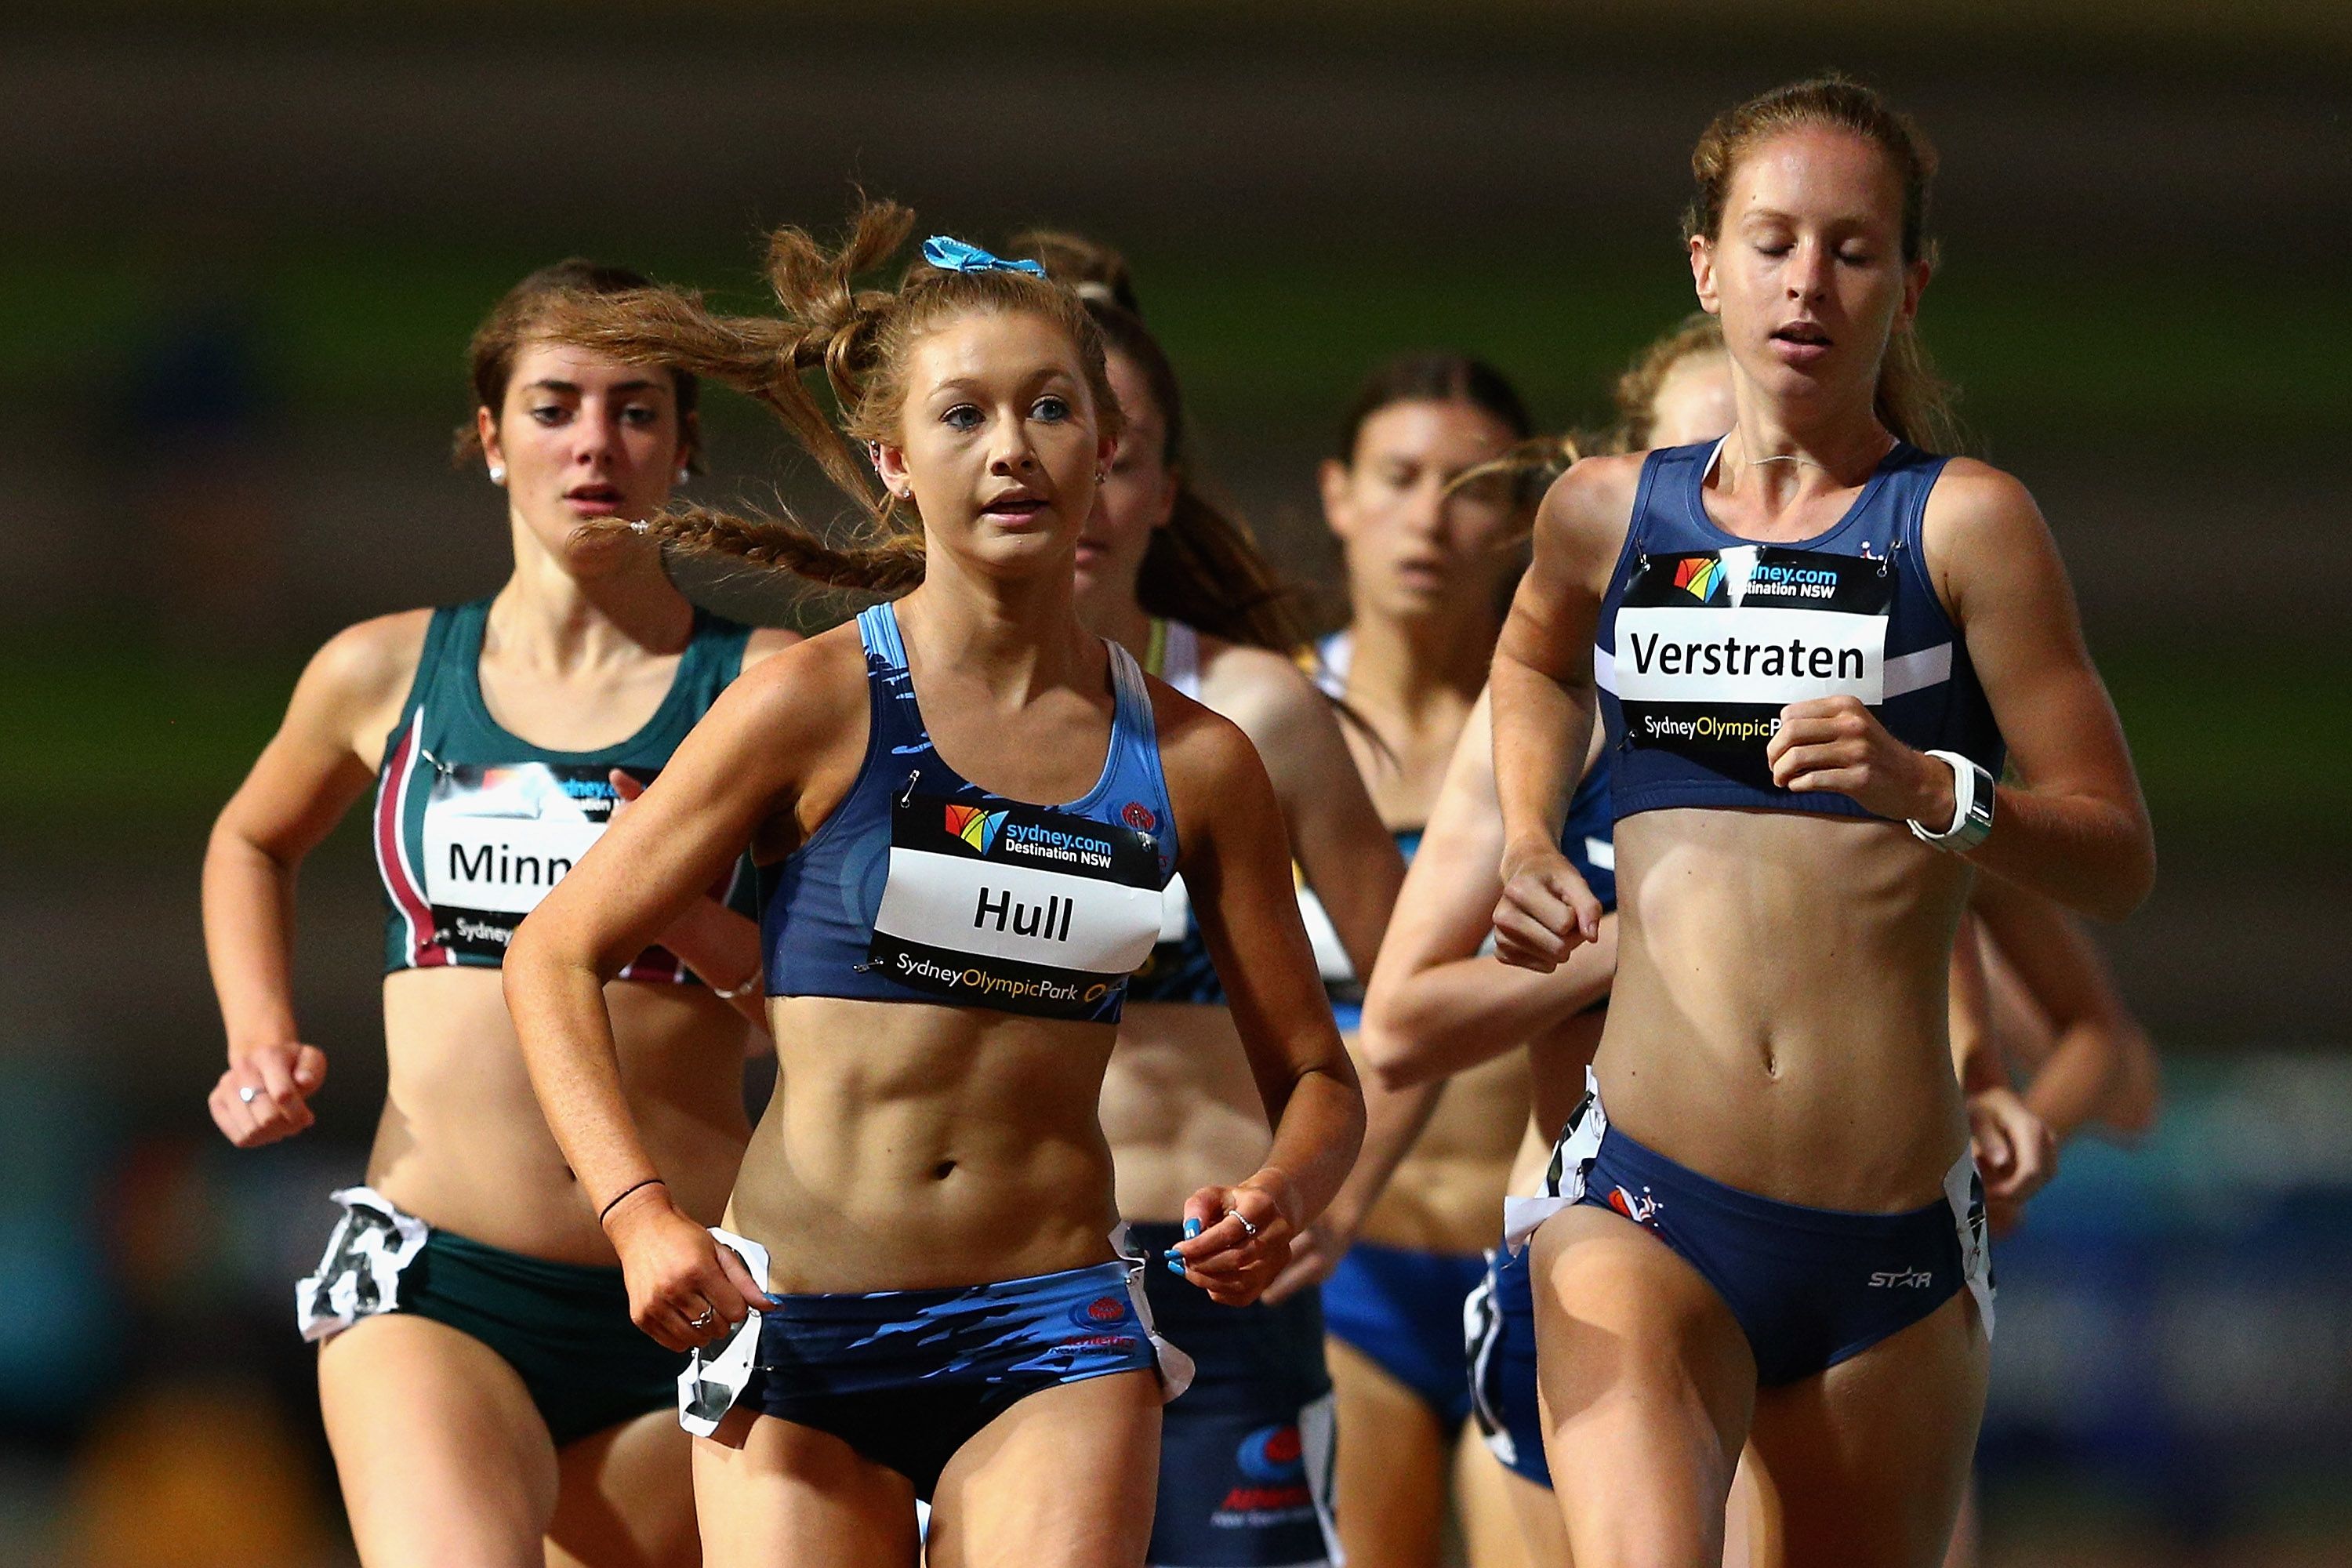 Jessica Hull competes in the 2015 Australian U20 Athletics Championships